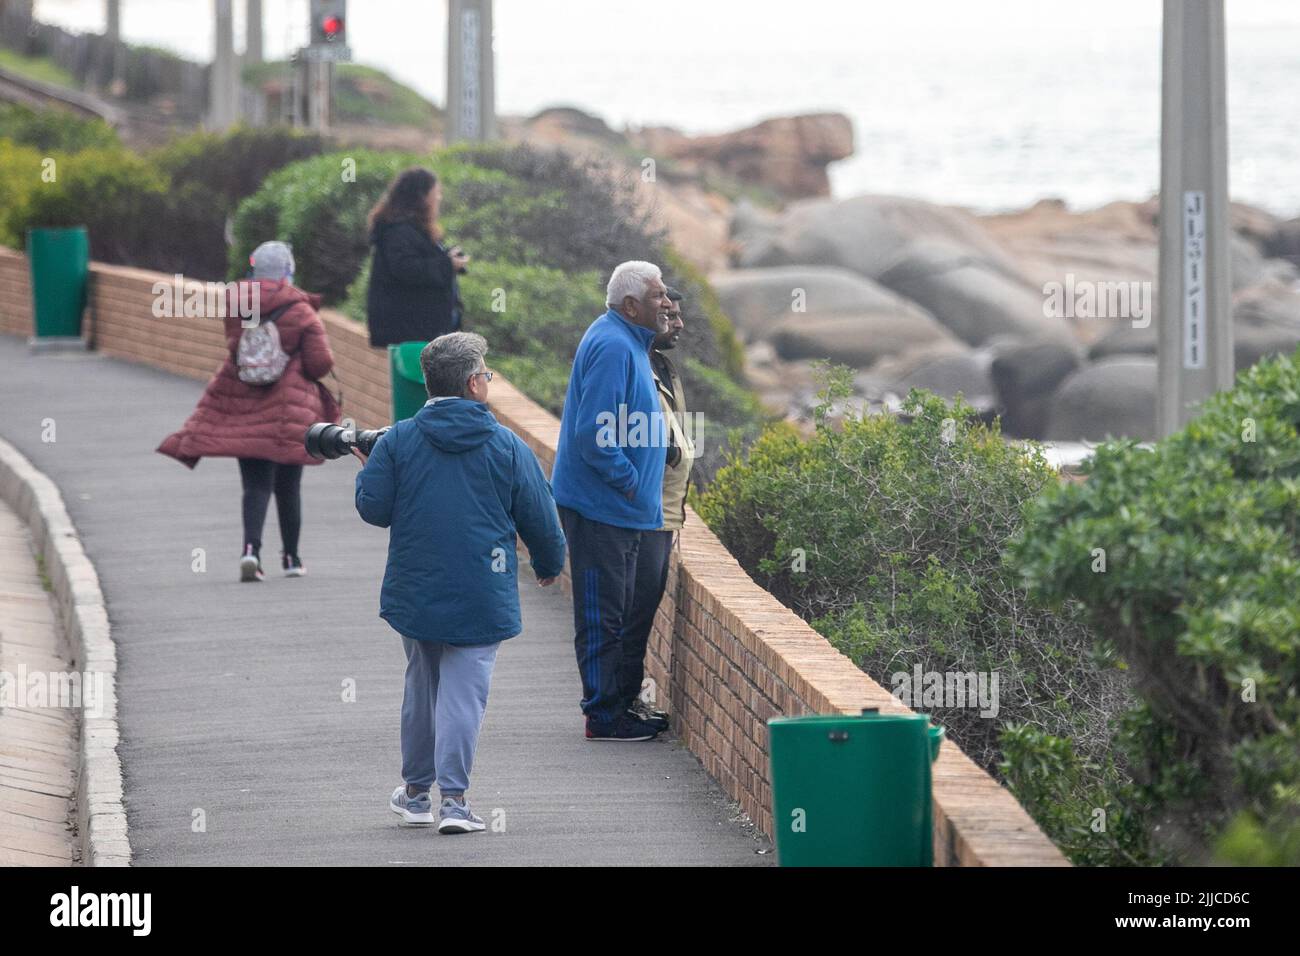 (220725) -- CAPE TOWN, July 25, 2022 (Xinhua) -- People watch whales in Cape Town, South Africa on July 13, 2022.  TO GO WITH 'Feature: Passion for whales takes Cape Town residents to citizen science' (Xinhua/Lyu Tianran) Stock Photo